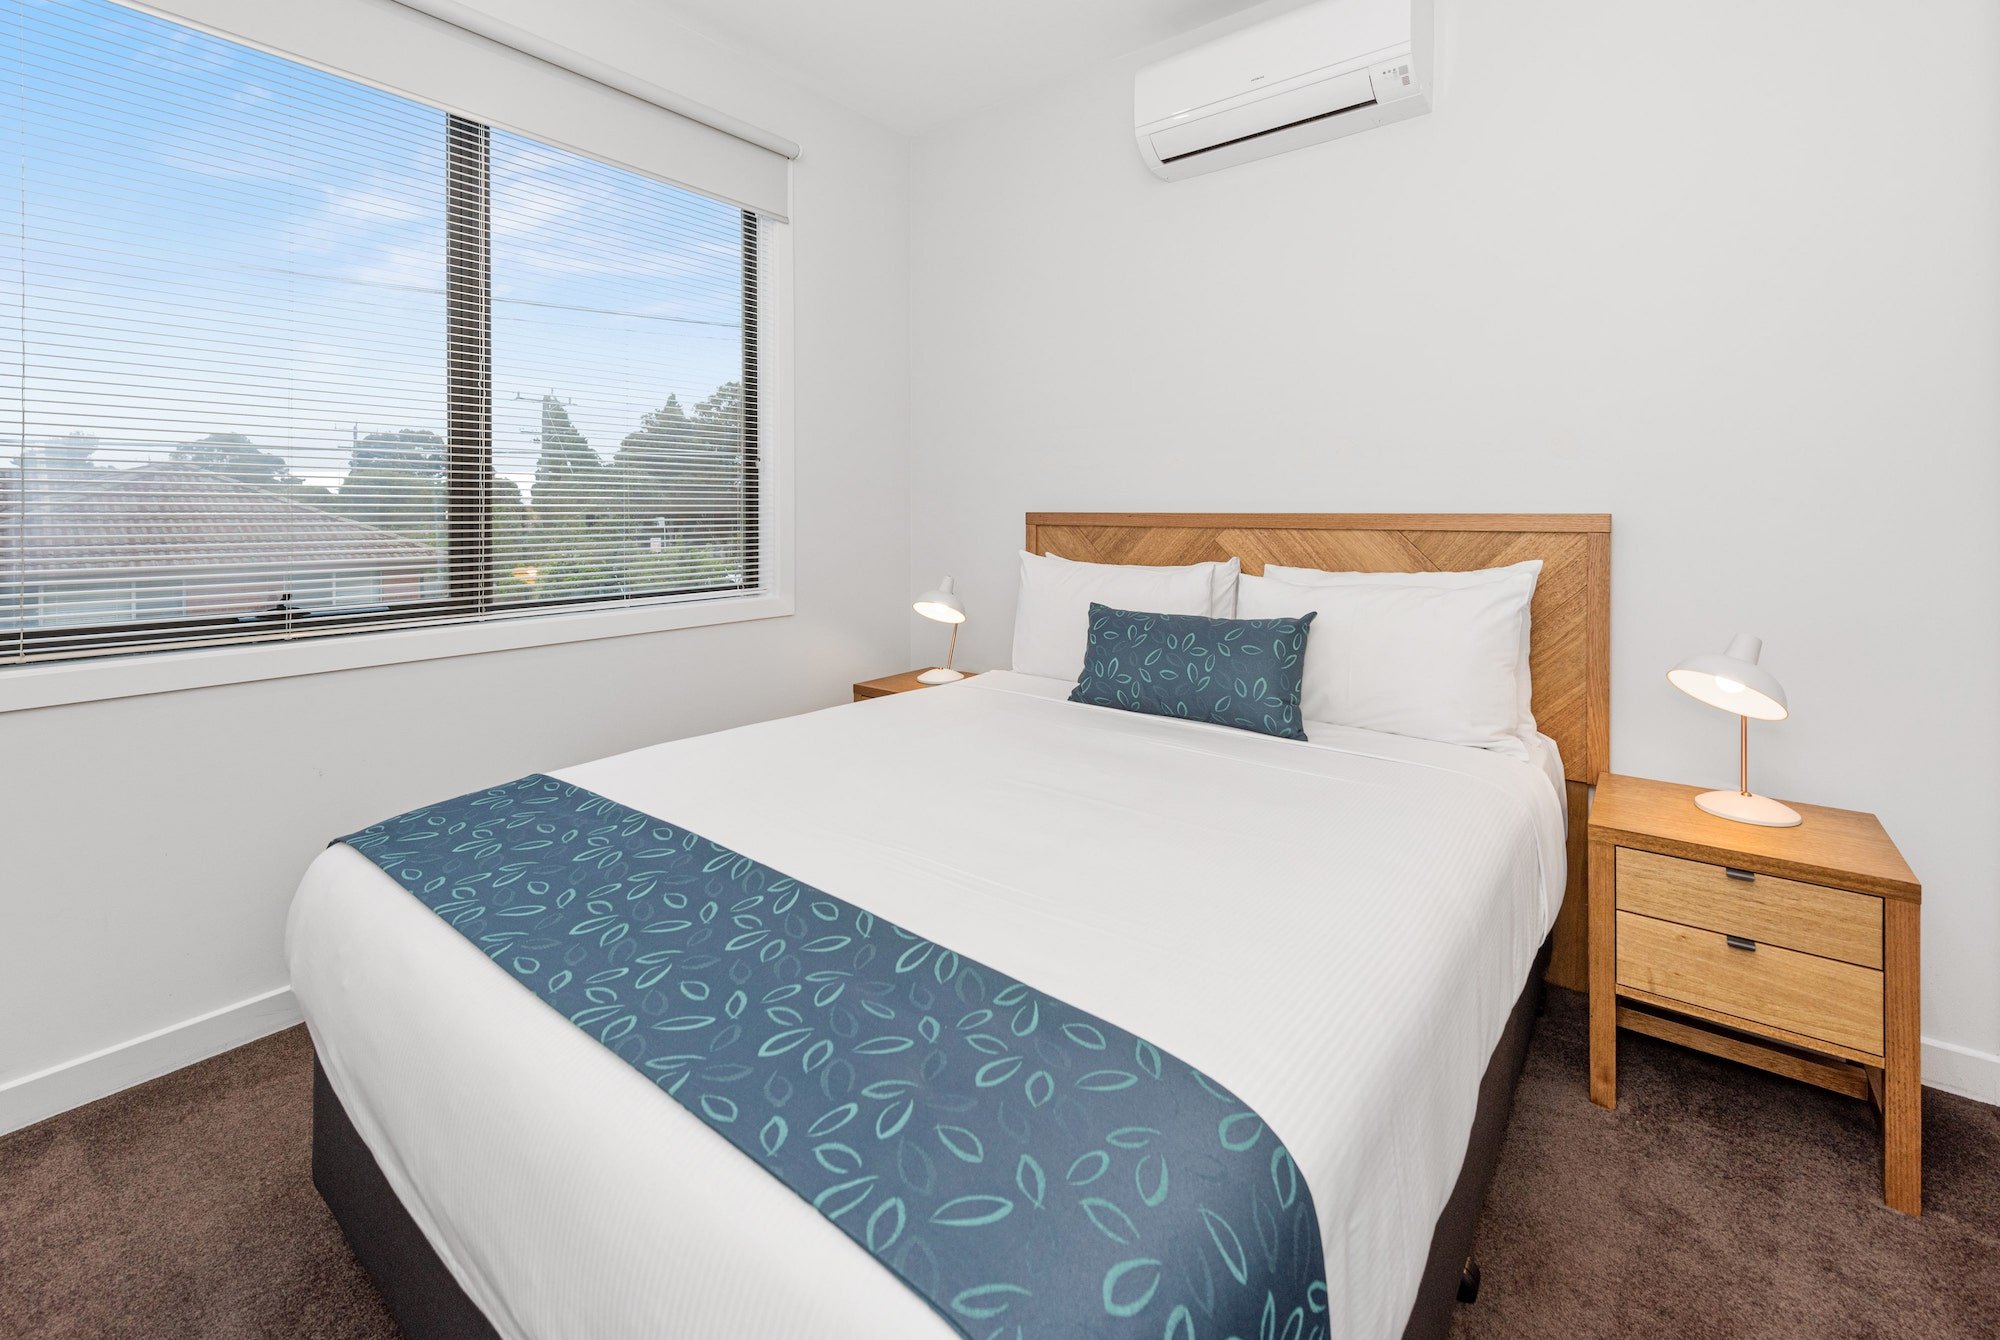 fawkner-executive-suites-and-serviced-apartments-accommodation-three-bedroom-townhouse-11.jpg